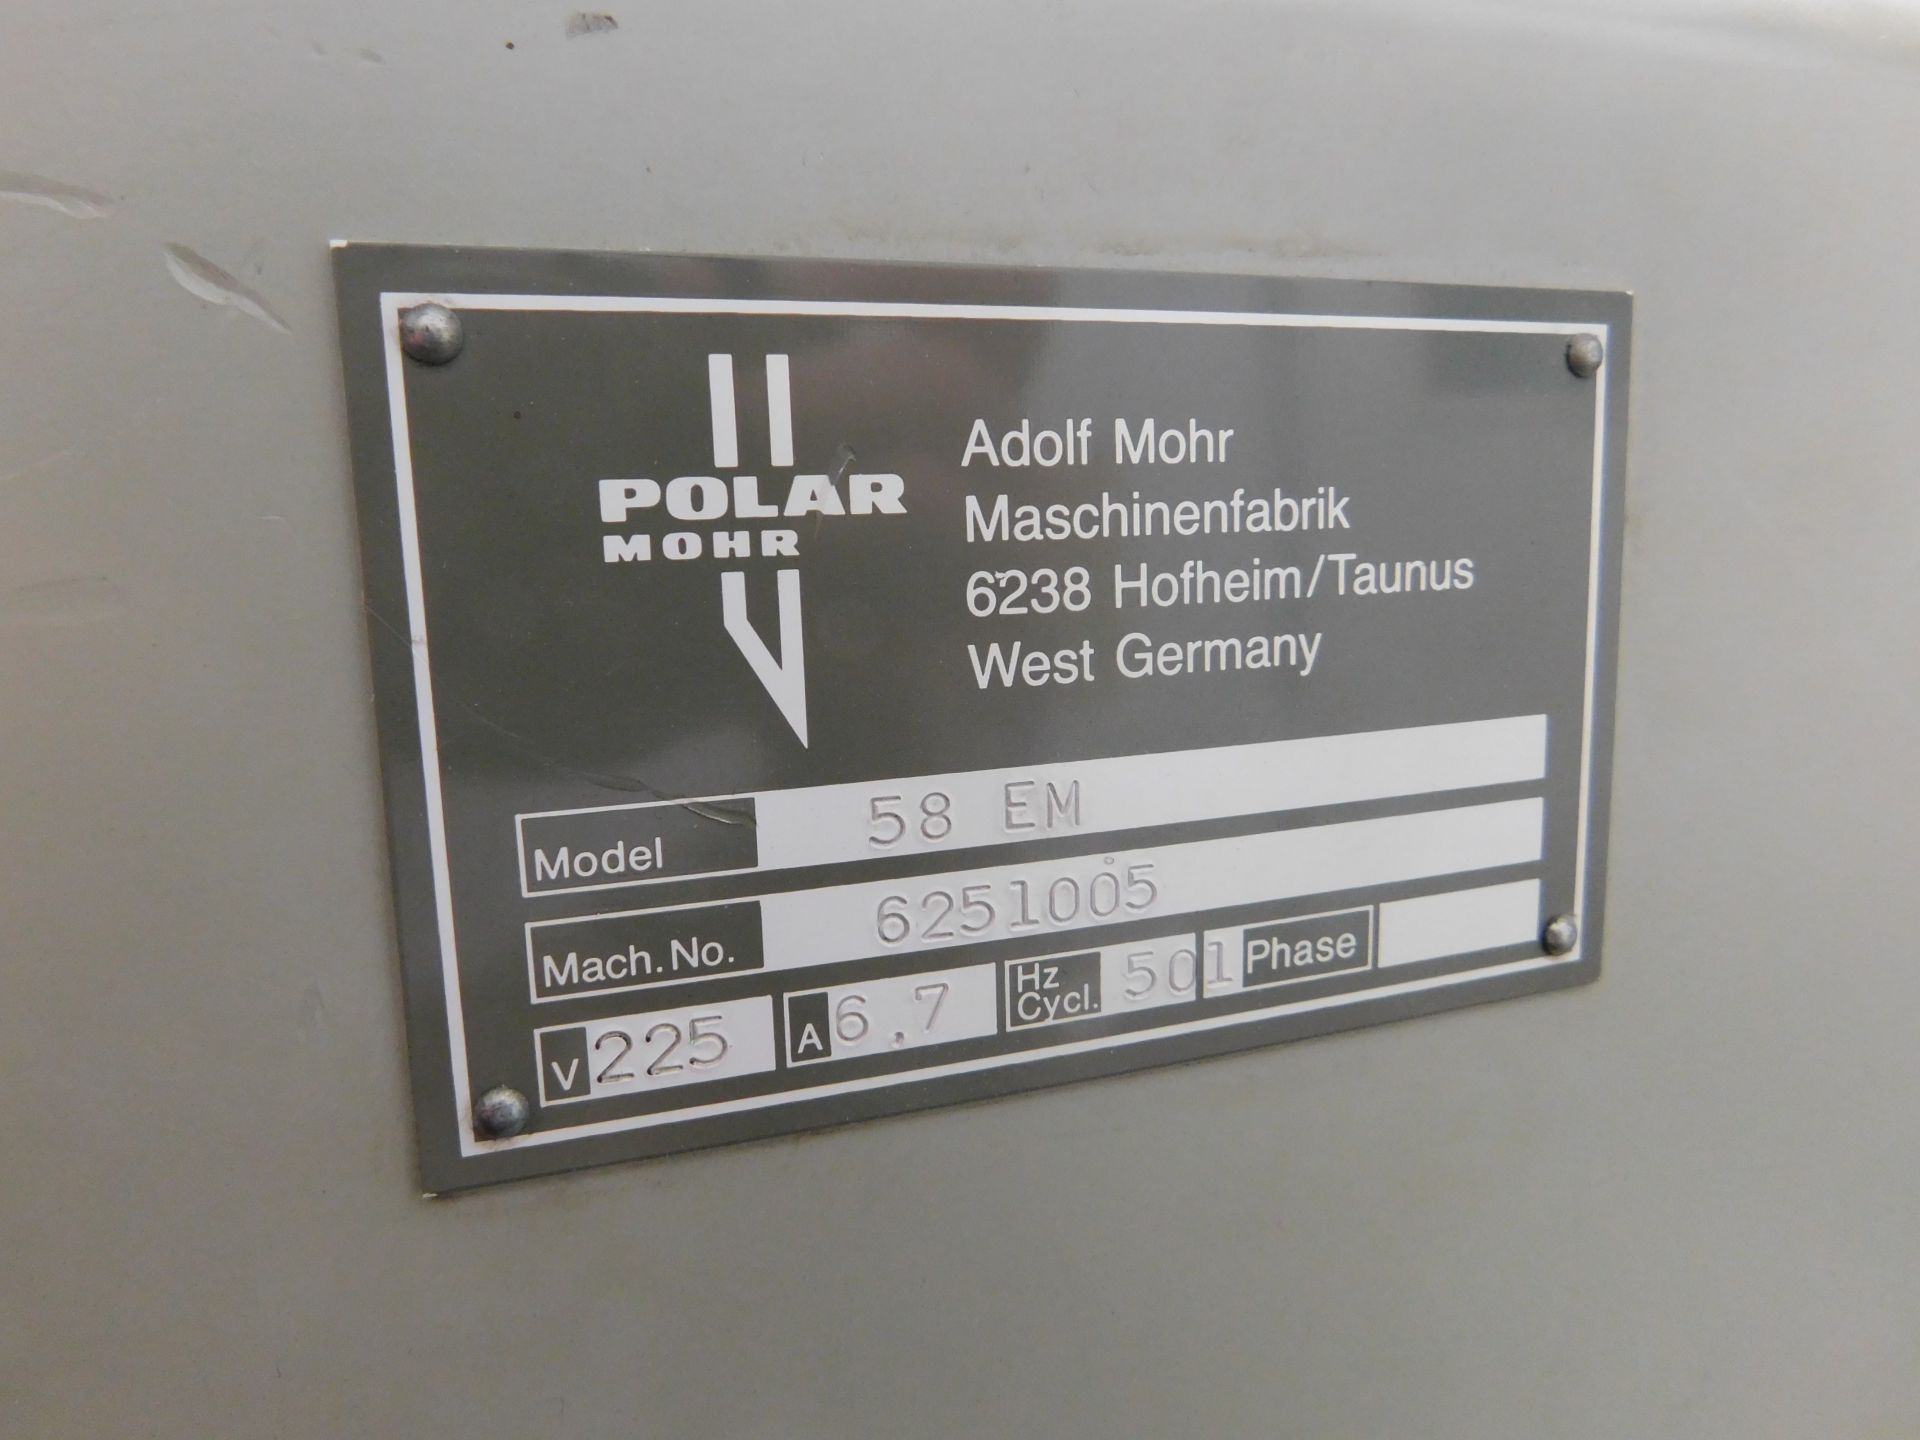 Polar Mohr Model 58 Guillotine Serial Number 6251005, Single Phase (Location: Hatfield - See General - Image 2 of 2